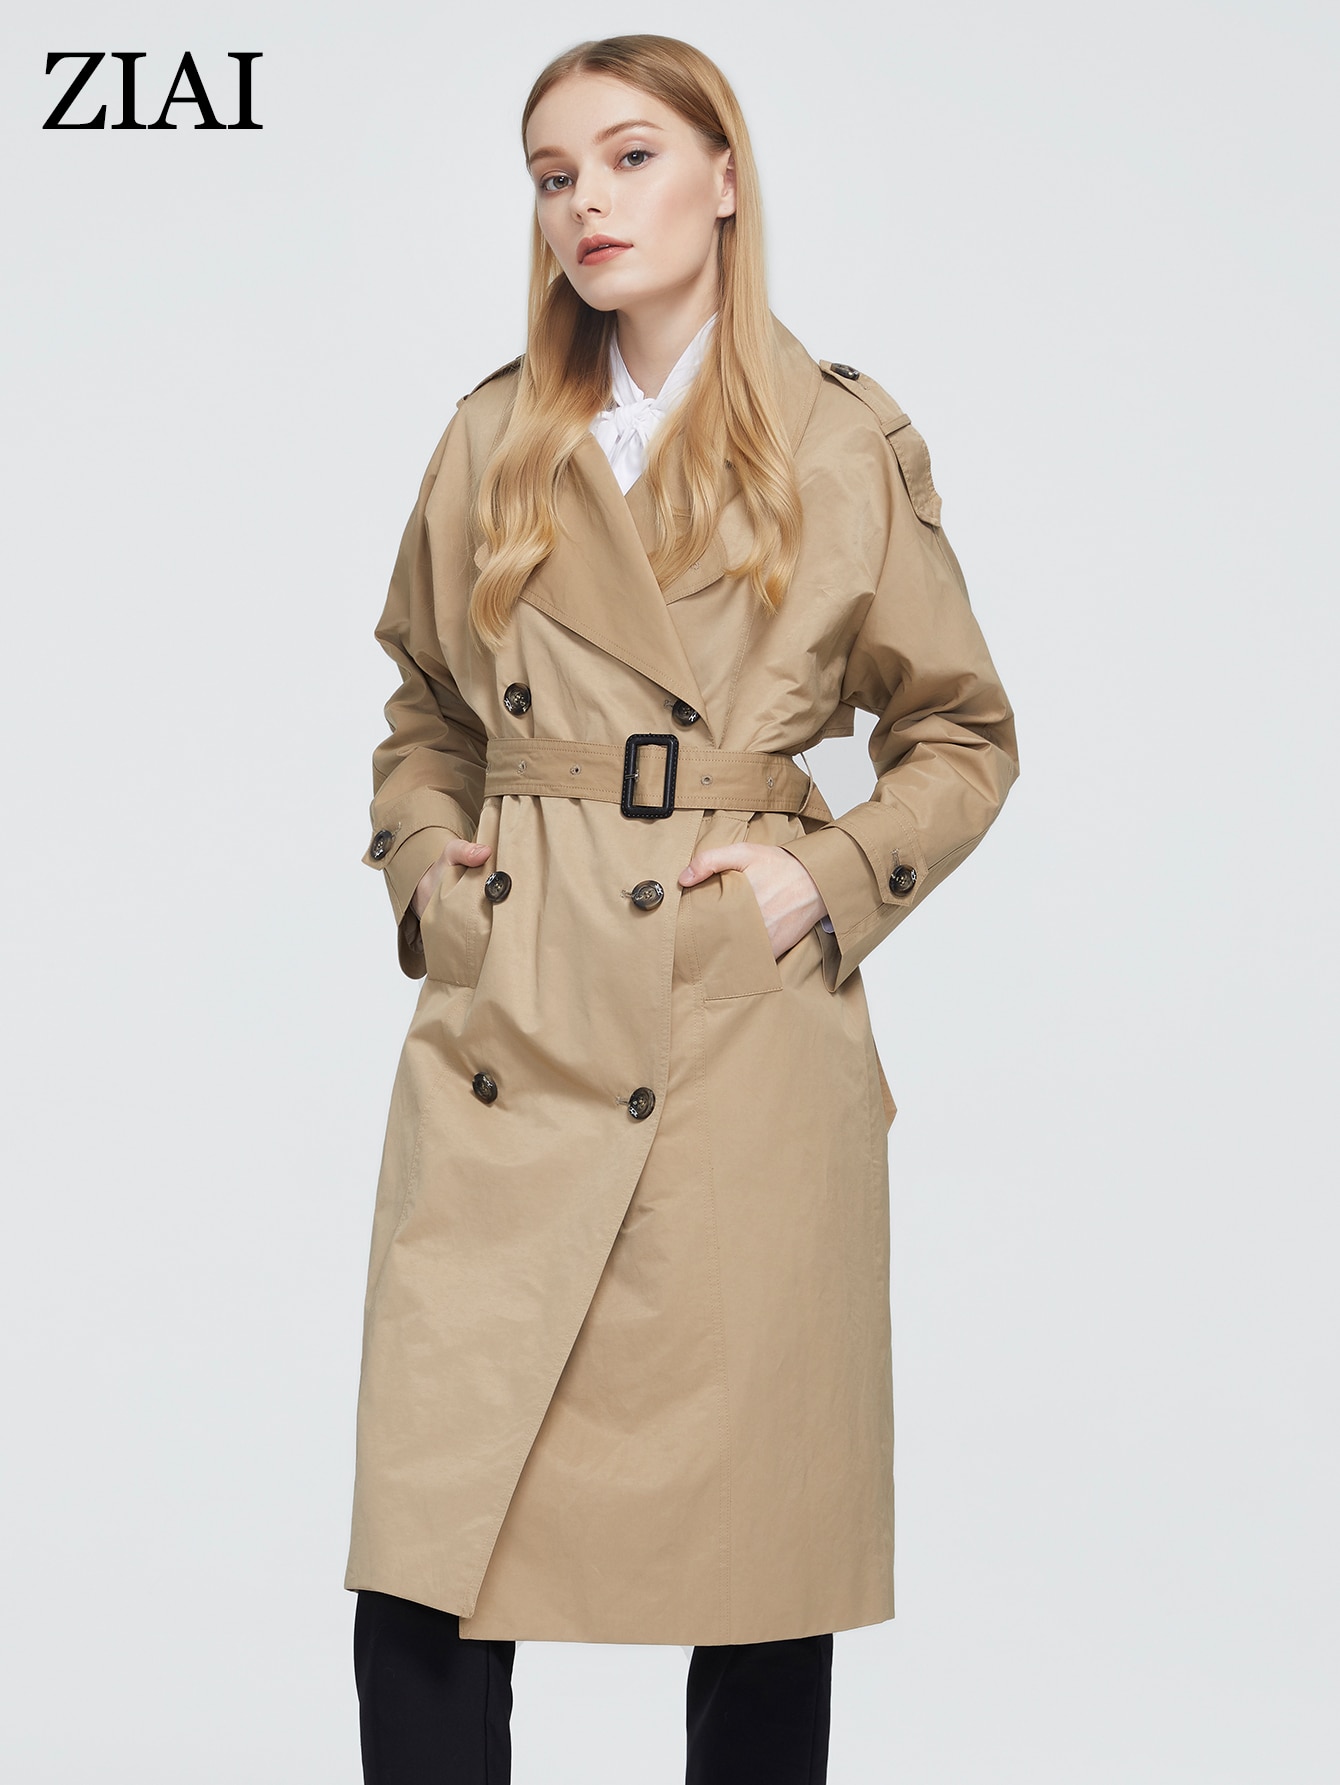 2022 Women's Long Trench Coat , Trend Casual England Style , Hot sale ...